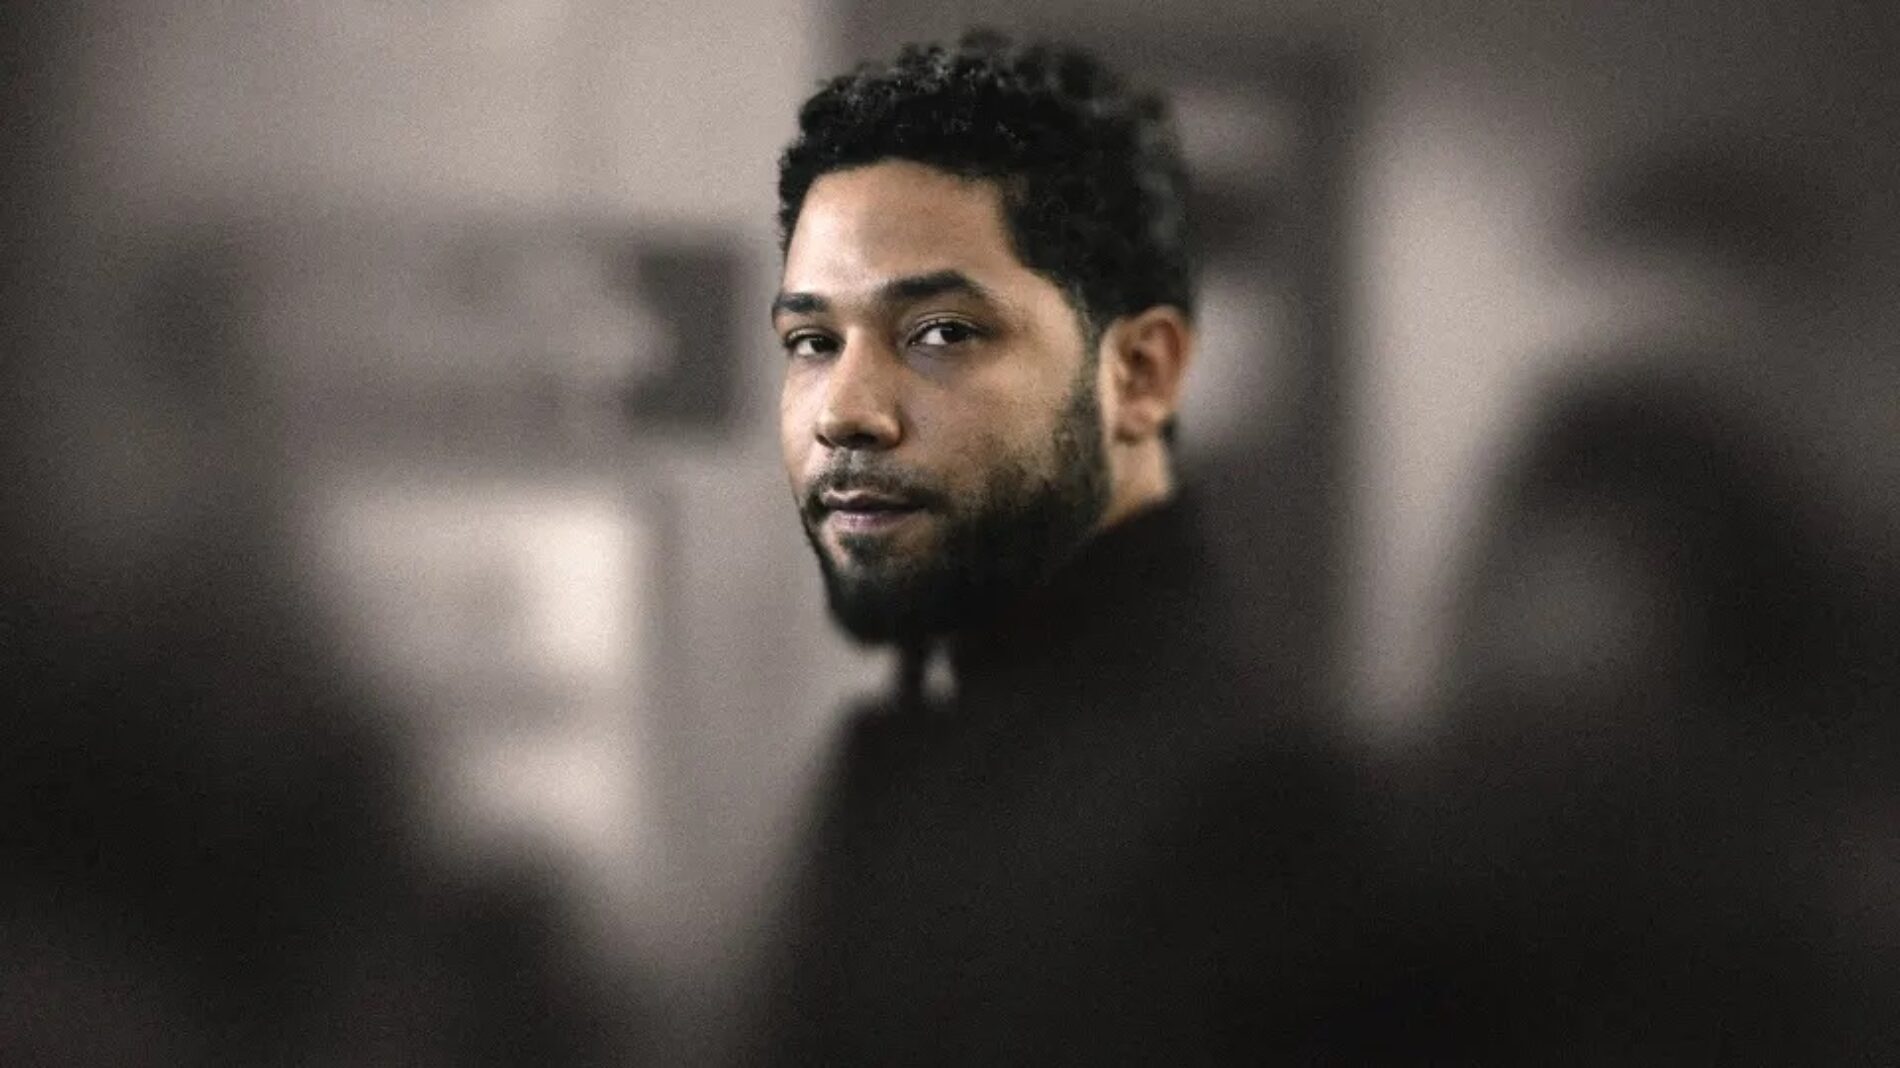 There’s A Documentary About The Jussie Smollett Case, And His ‘Attackers’ Are Talking